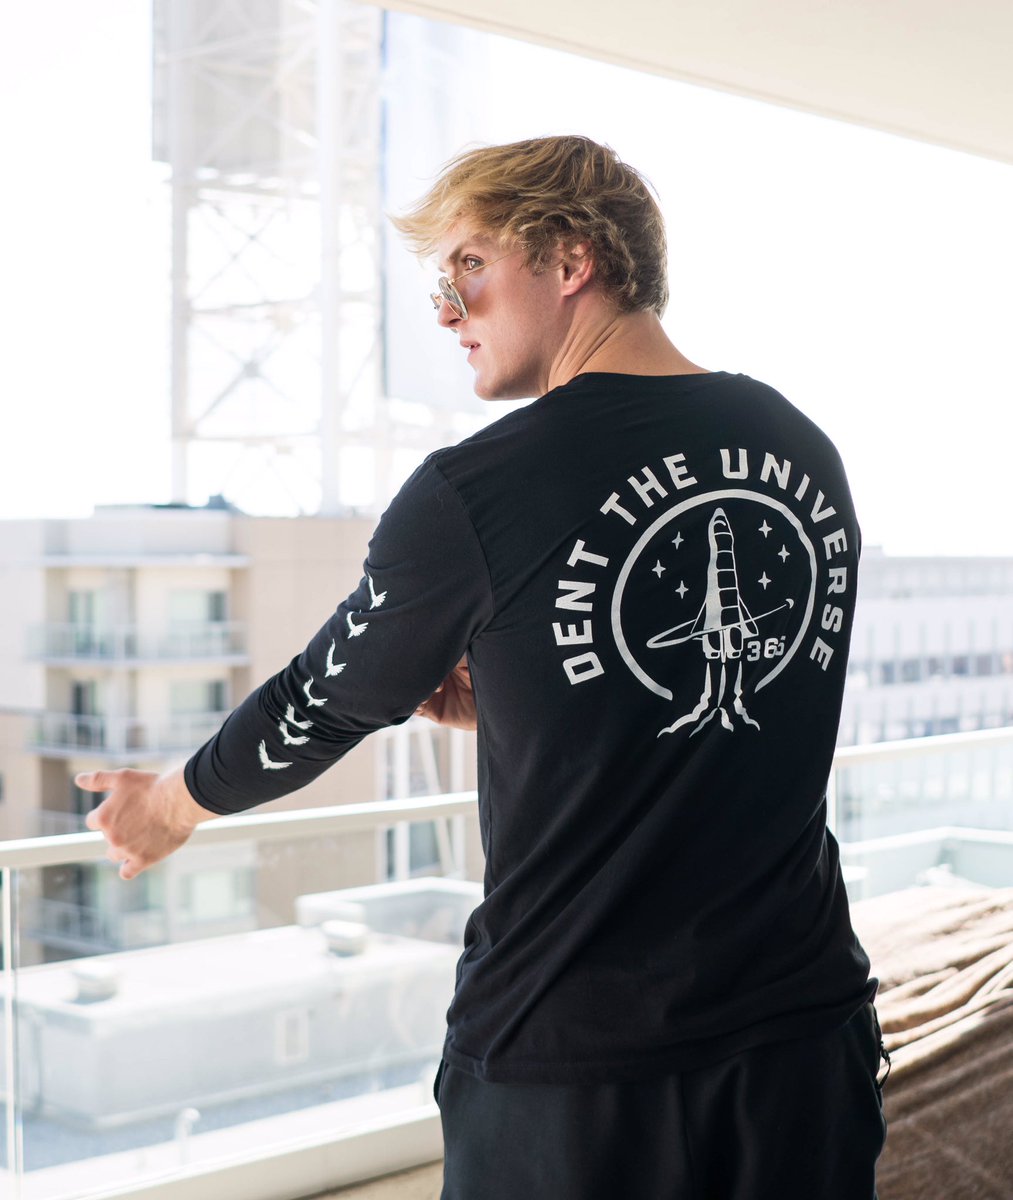 Logan on Twitter: Logang, you get your limited edition #DentTheUniverse shirt yet? You got about 30 hours 😉 GO GO! https://t.co/RUoHdnXrh9 https://t.co/nqaswhQQV7"